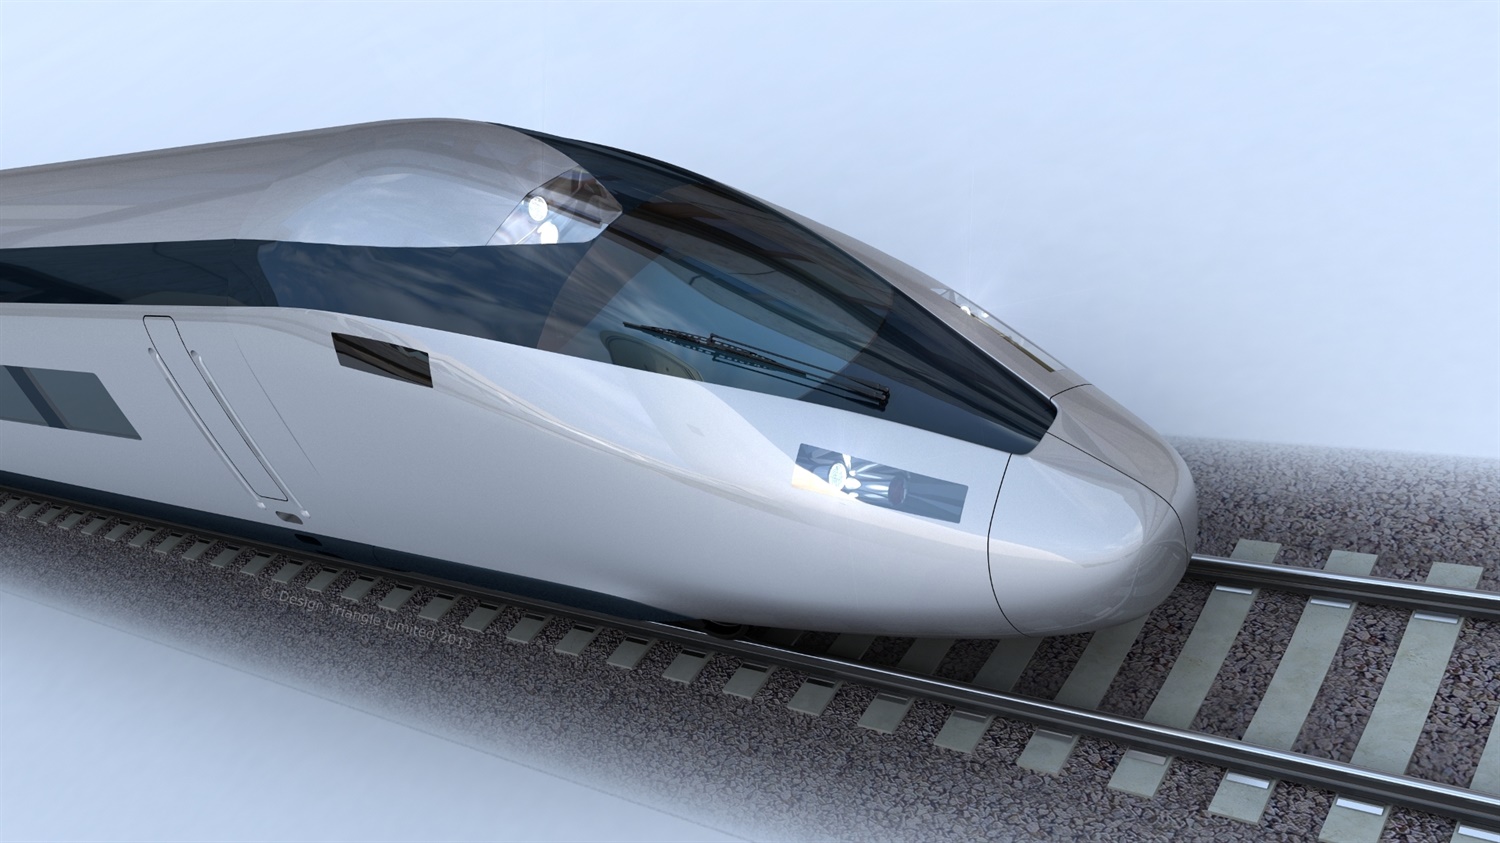 East Midlands outlines plans to ‘put HS2 site to good use’ 